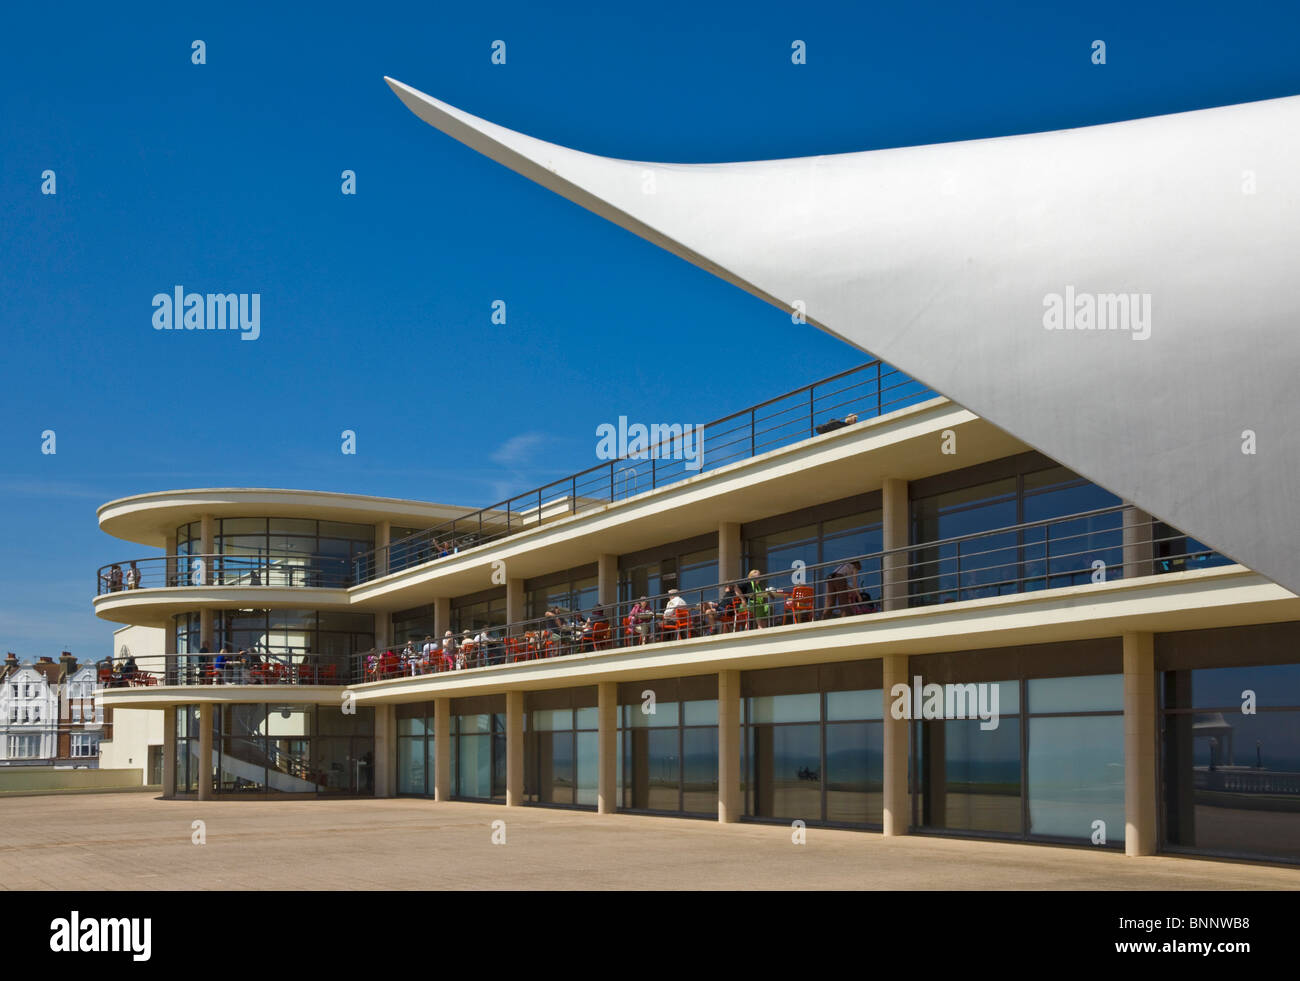 Outdoor stage at De La Warr Pavilion, Bexhill on Sea, East Sussex, England, UK, GB, EU, Europe Stock Photo